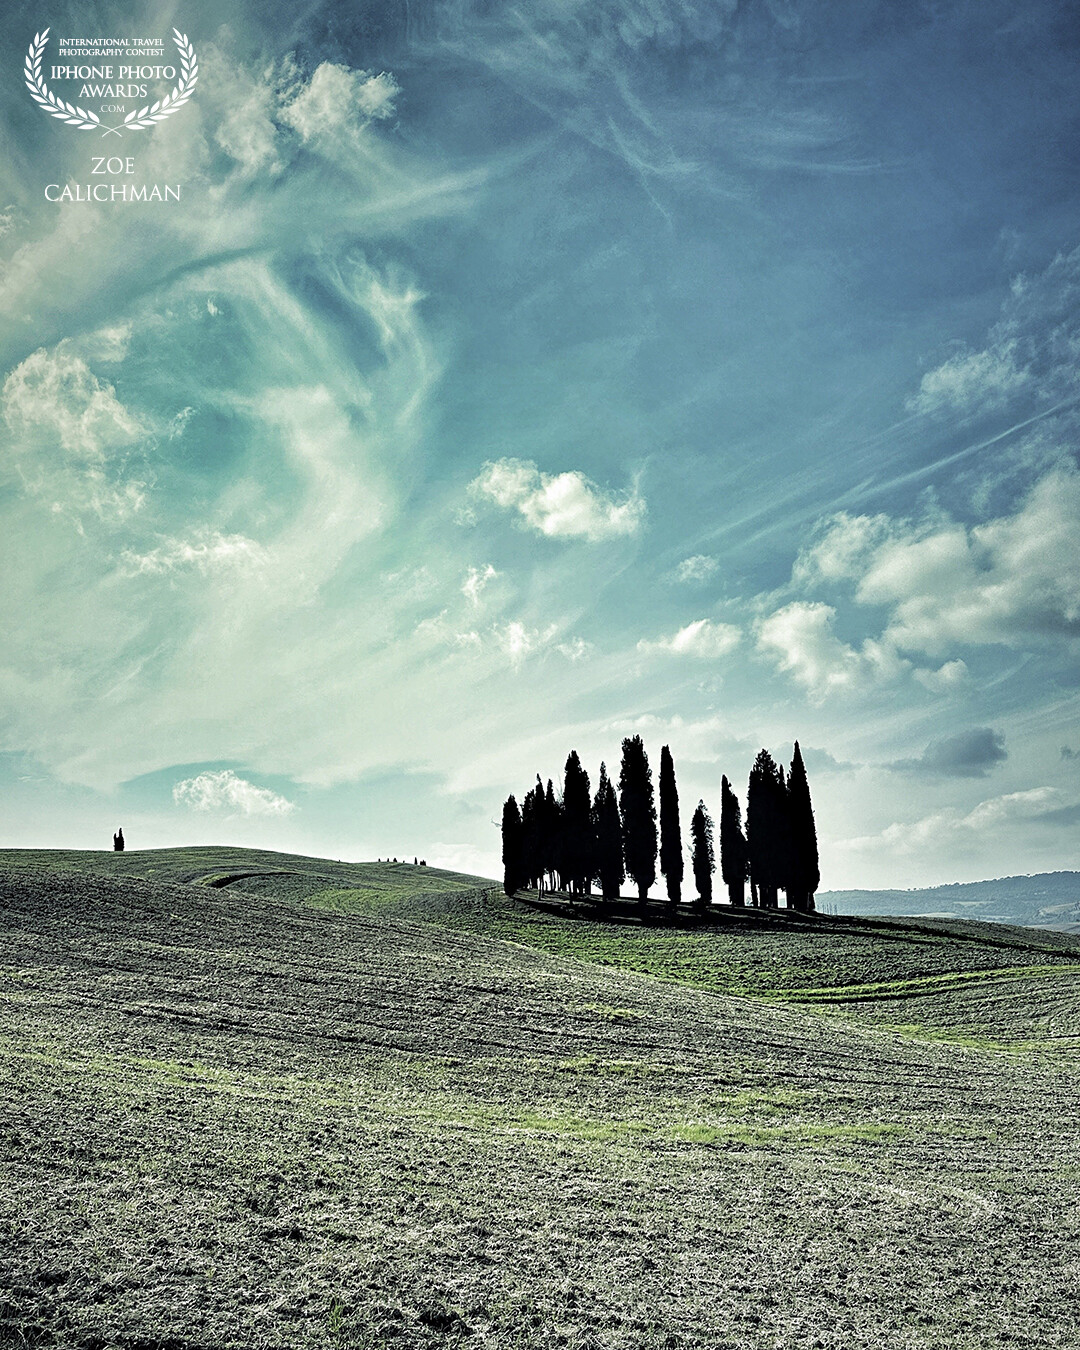 ValD’orcia, a region in Tuscany where massive rolling hills and lines of cypress trees form breathtaking scenery.